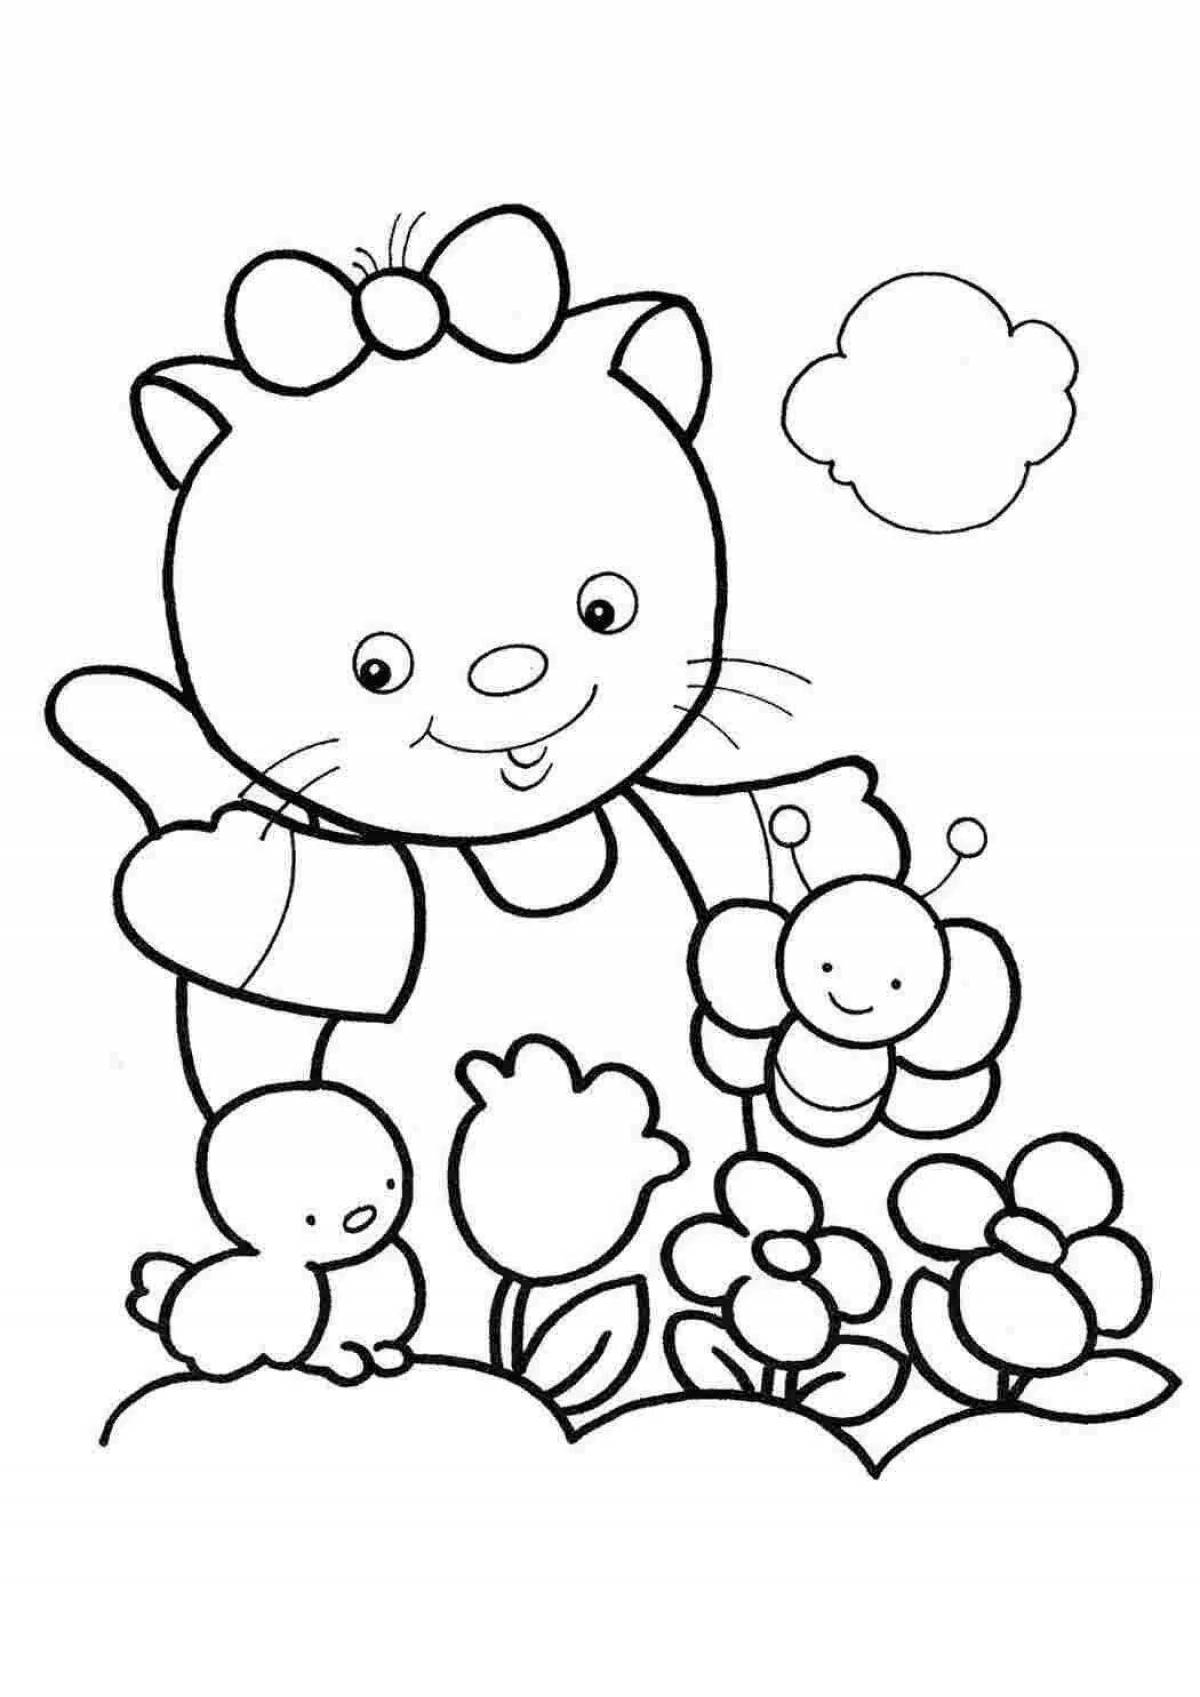 Coloring book for 3 year old girls